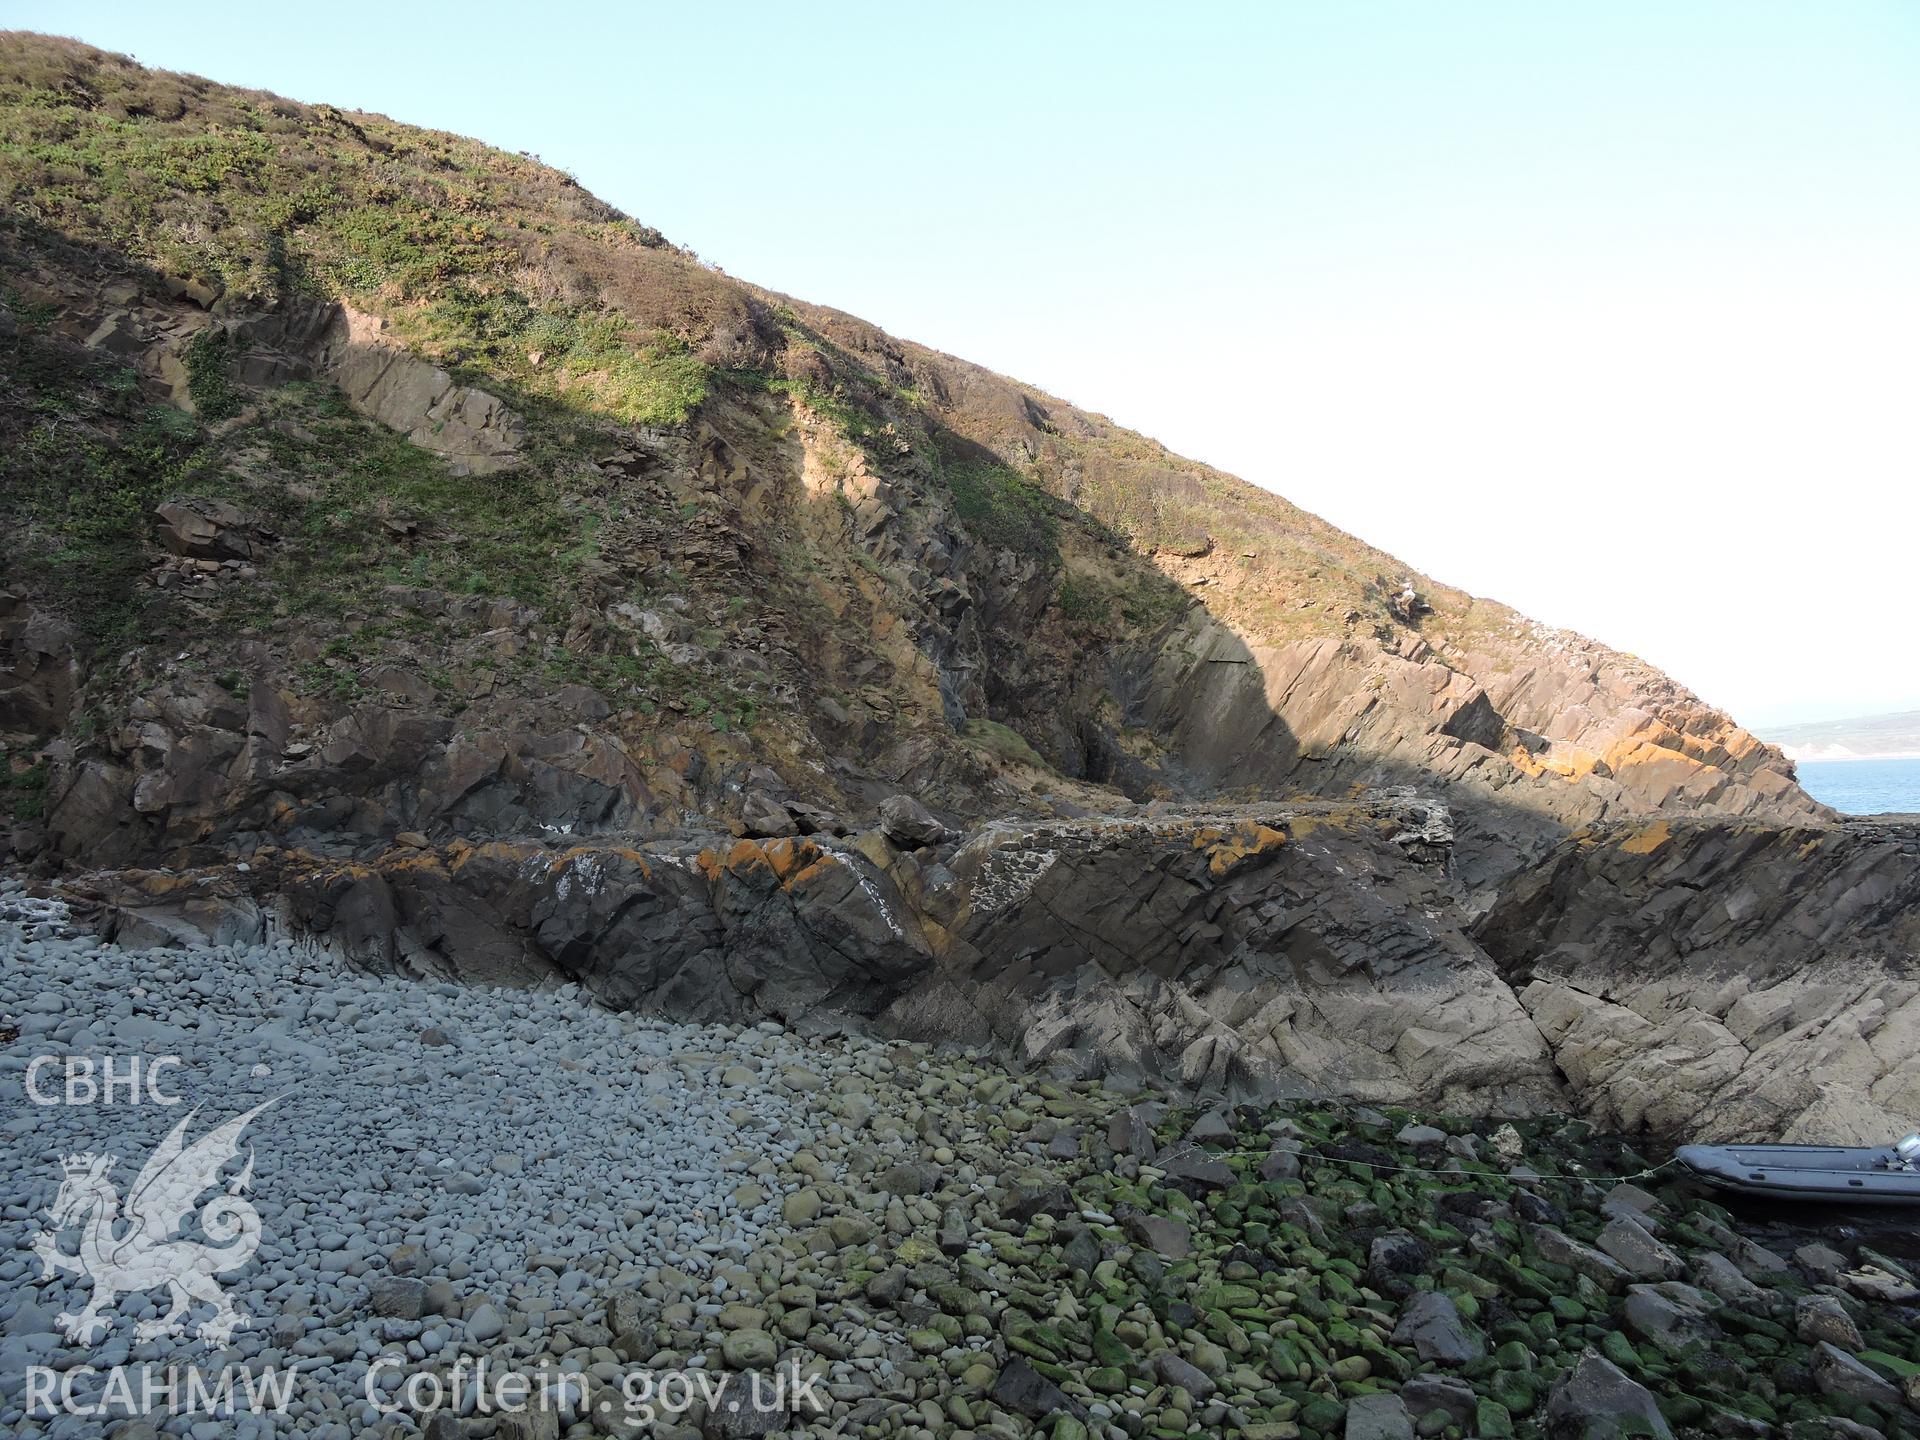 General view of cliff next to the quay. Part of a digital photographic survey of Porth y Pistyll, Aberdaron, produced in 2020 by Michael Statham.